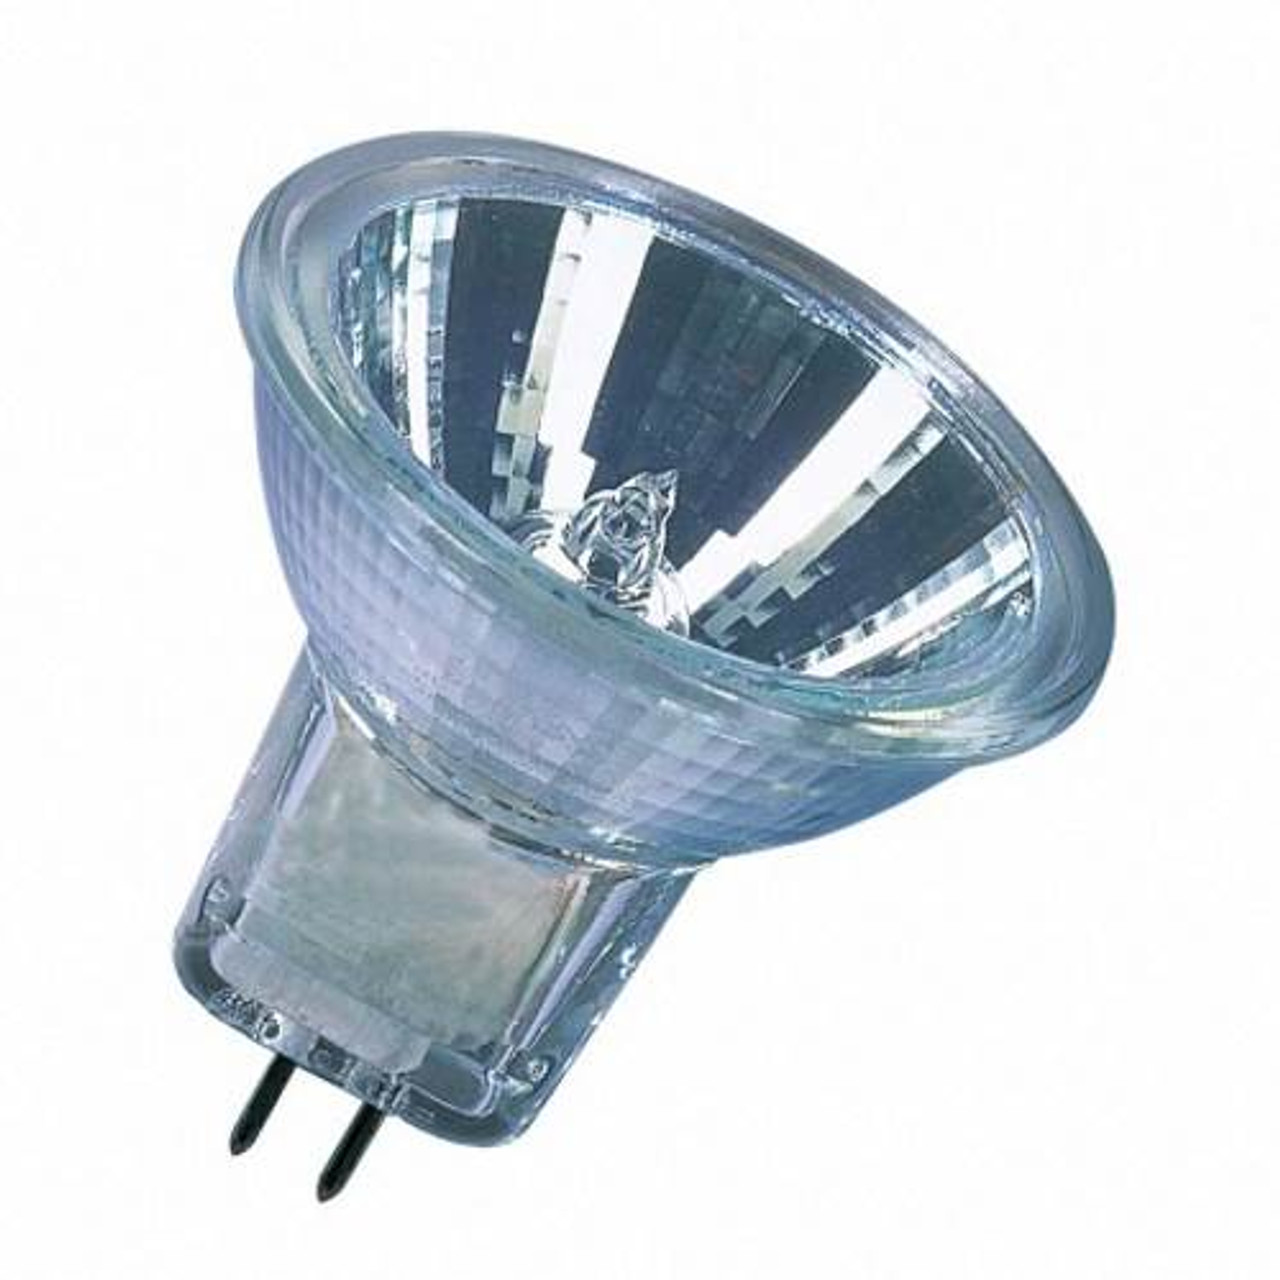 Elite Series Retrofit LED to replace Small 10w G4 / T3 Halogen